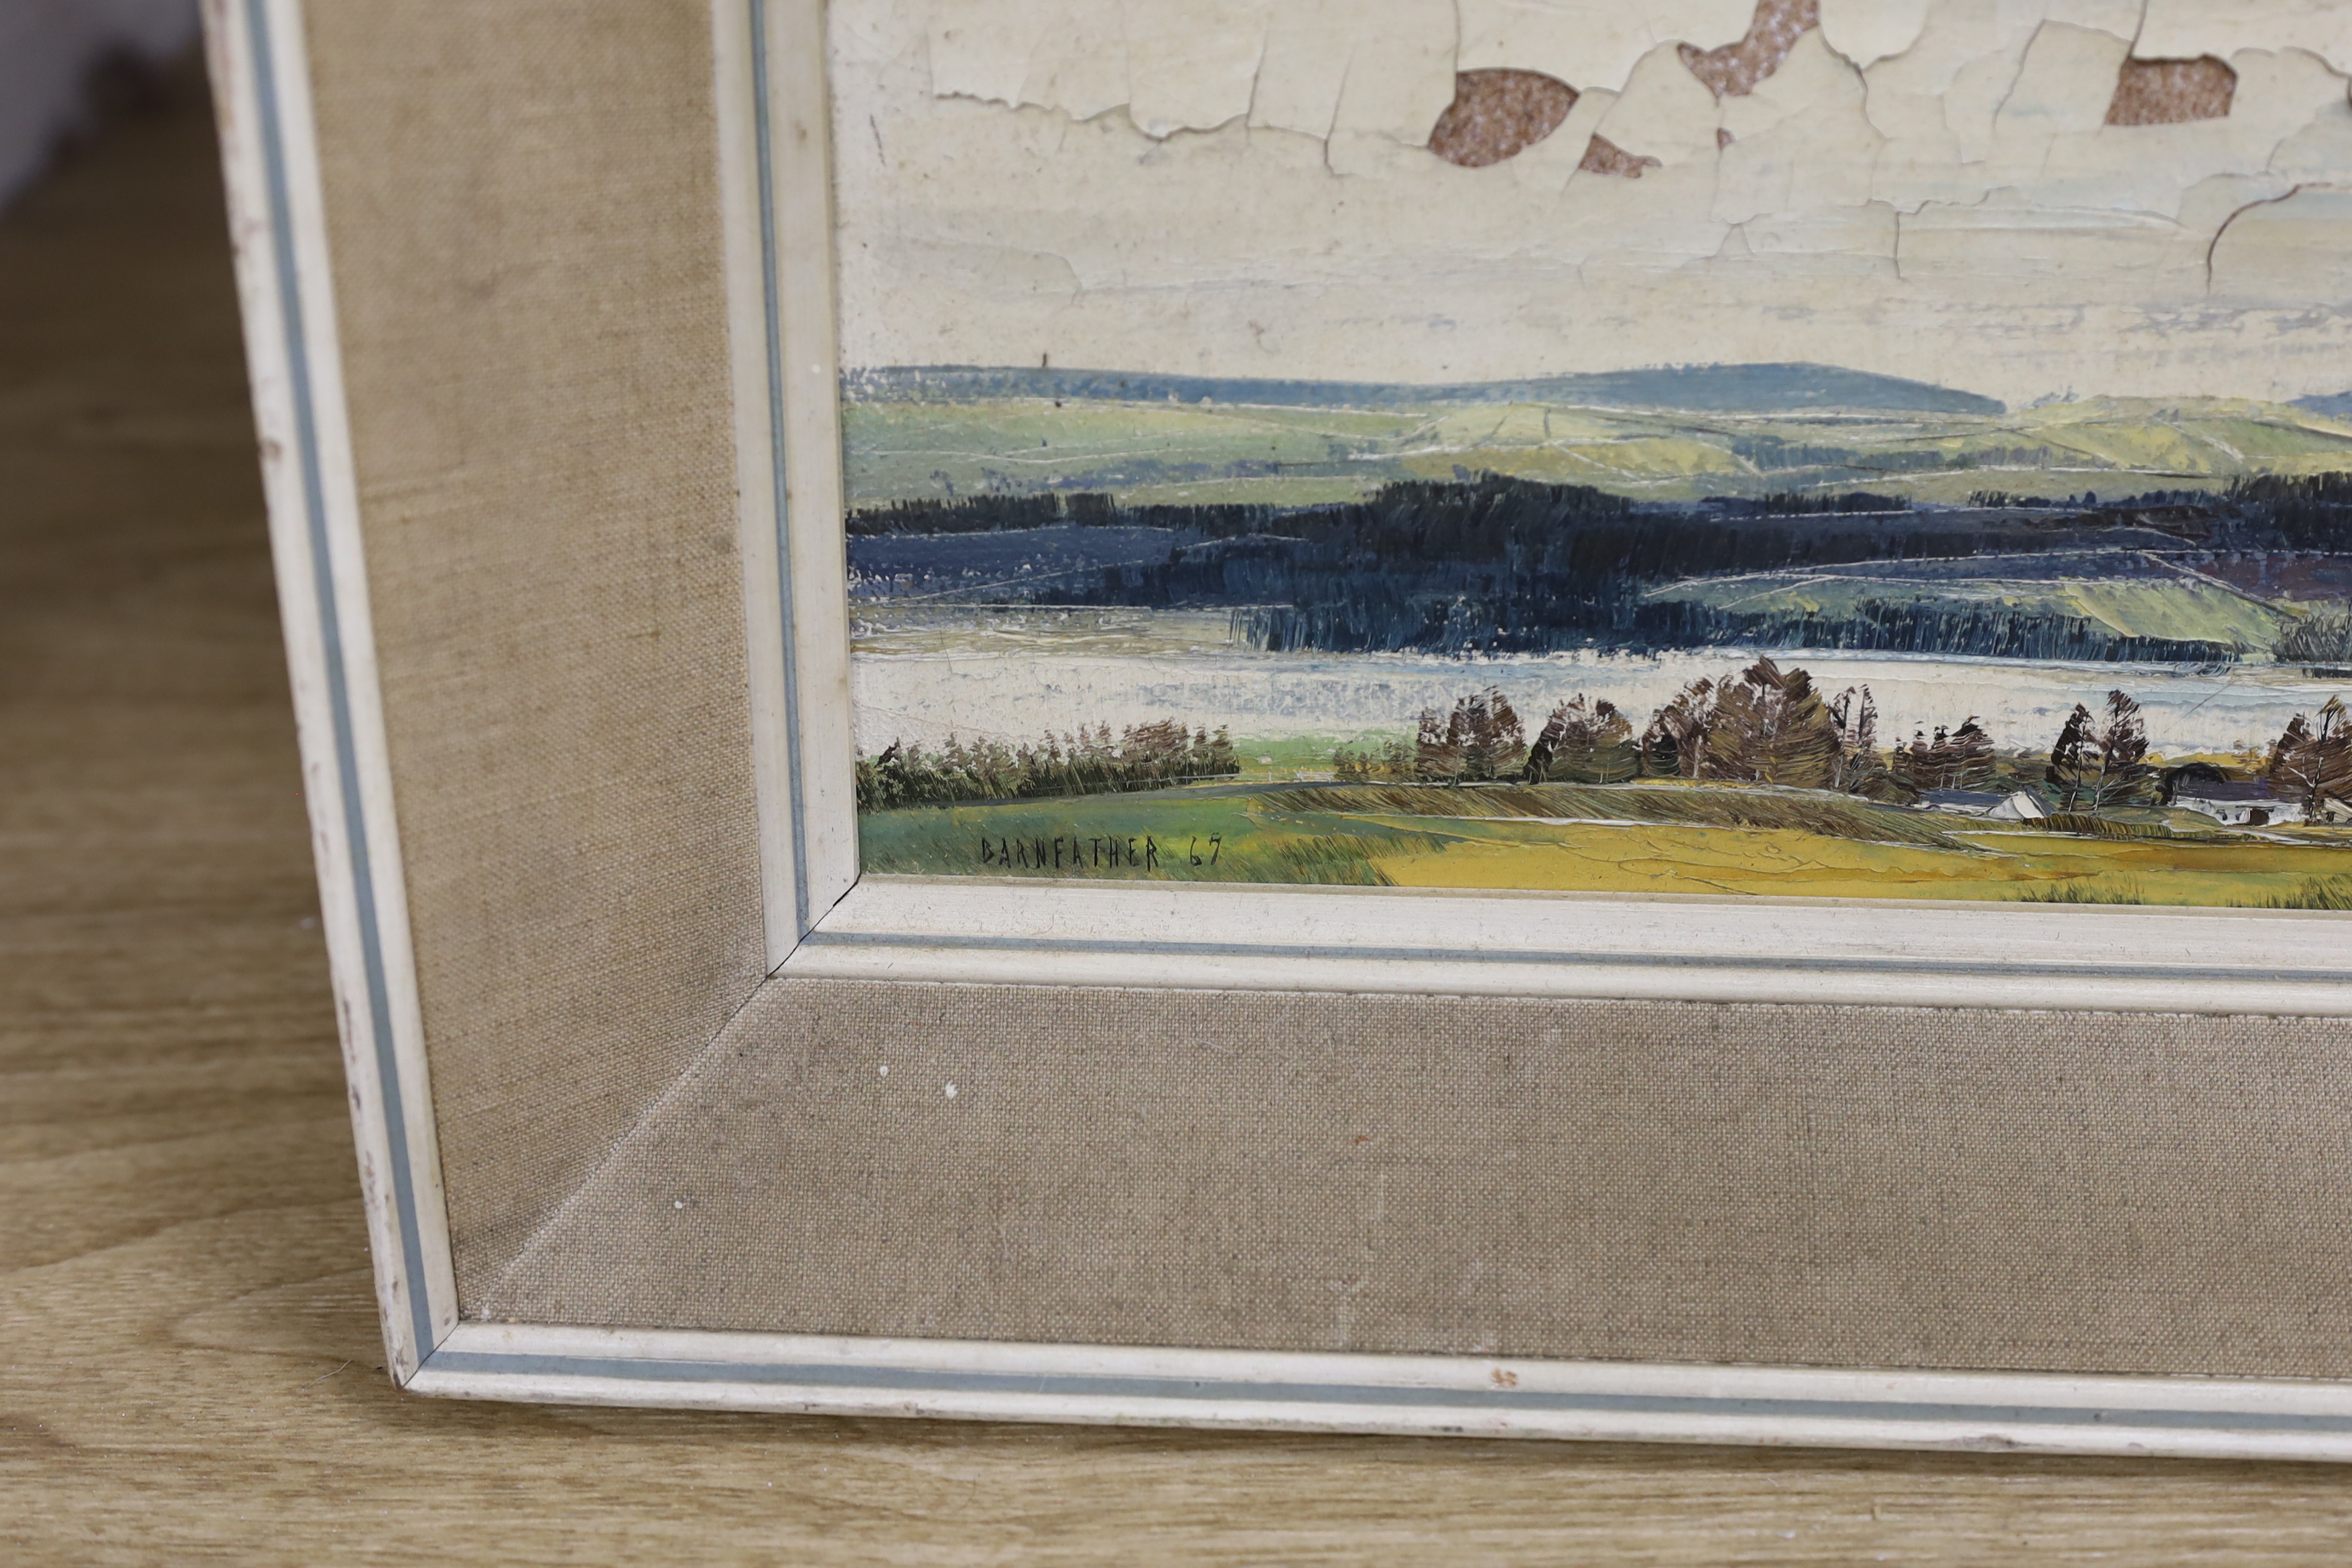 Michael Barnfather (1934-), oil on board, View over the Severn, signed and dated '67, 14 x 60cm, paint flaking